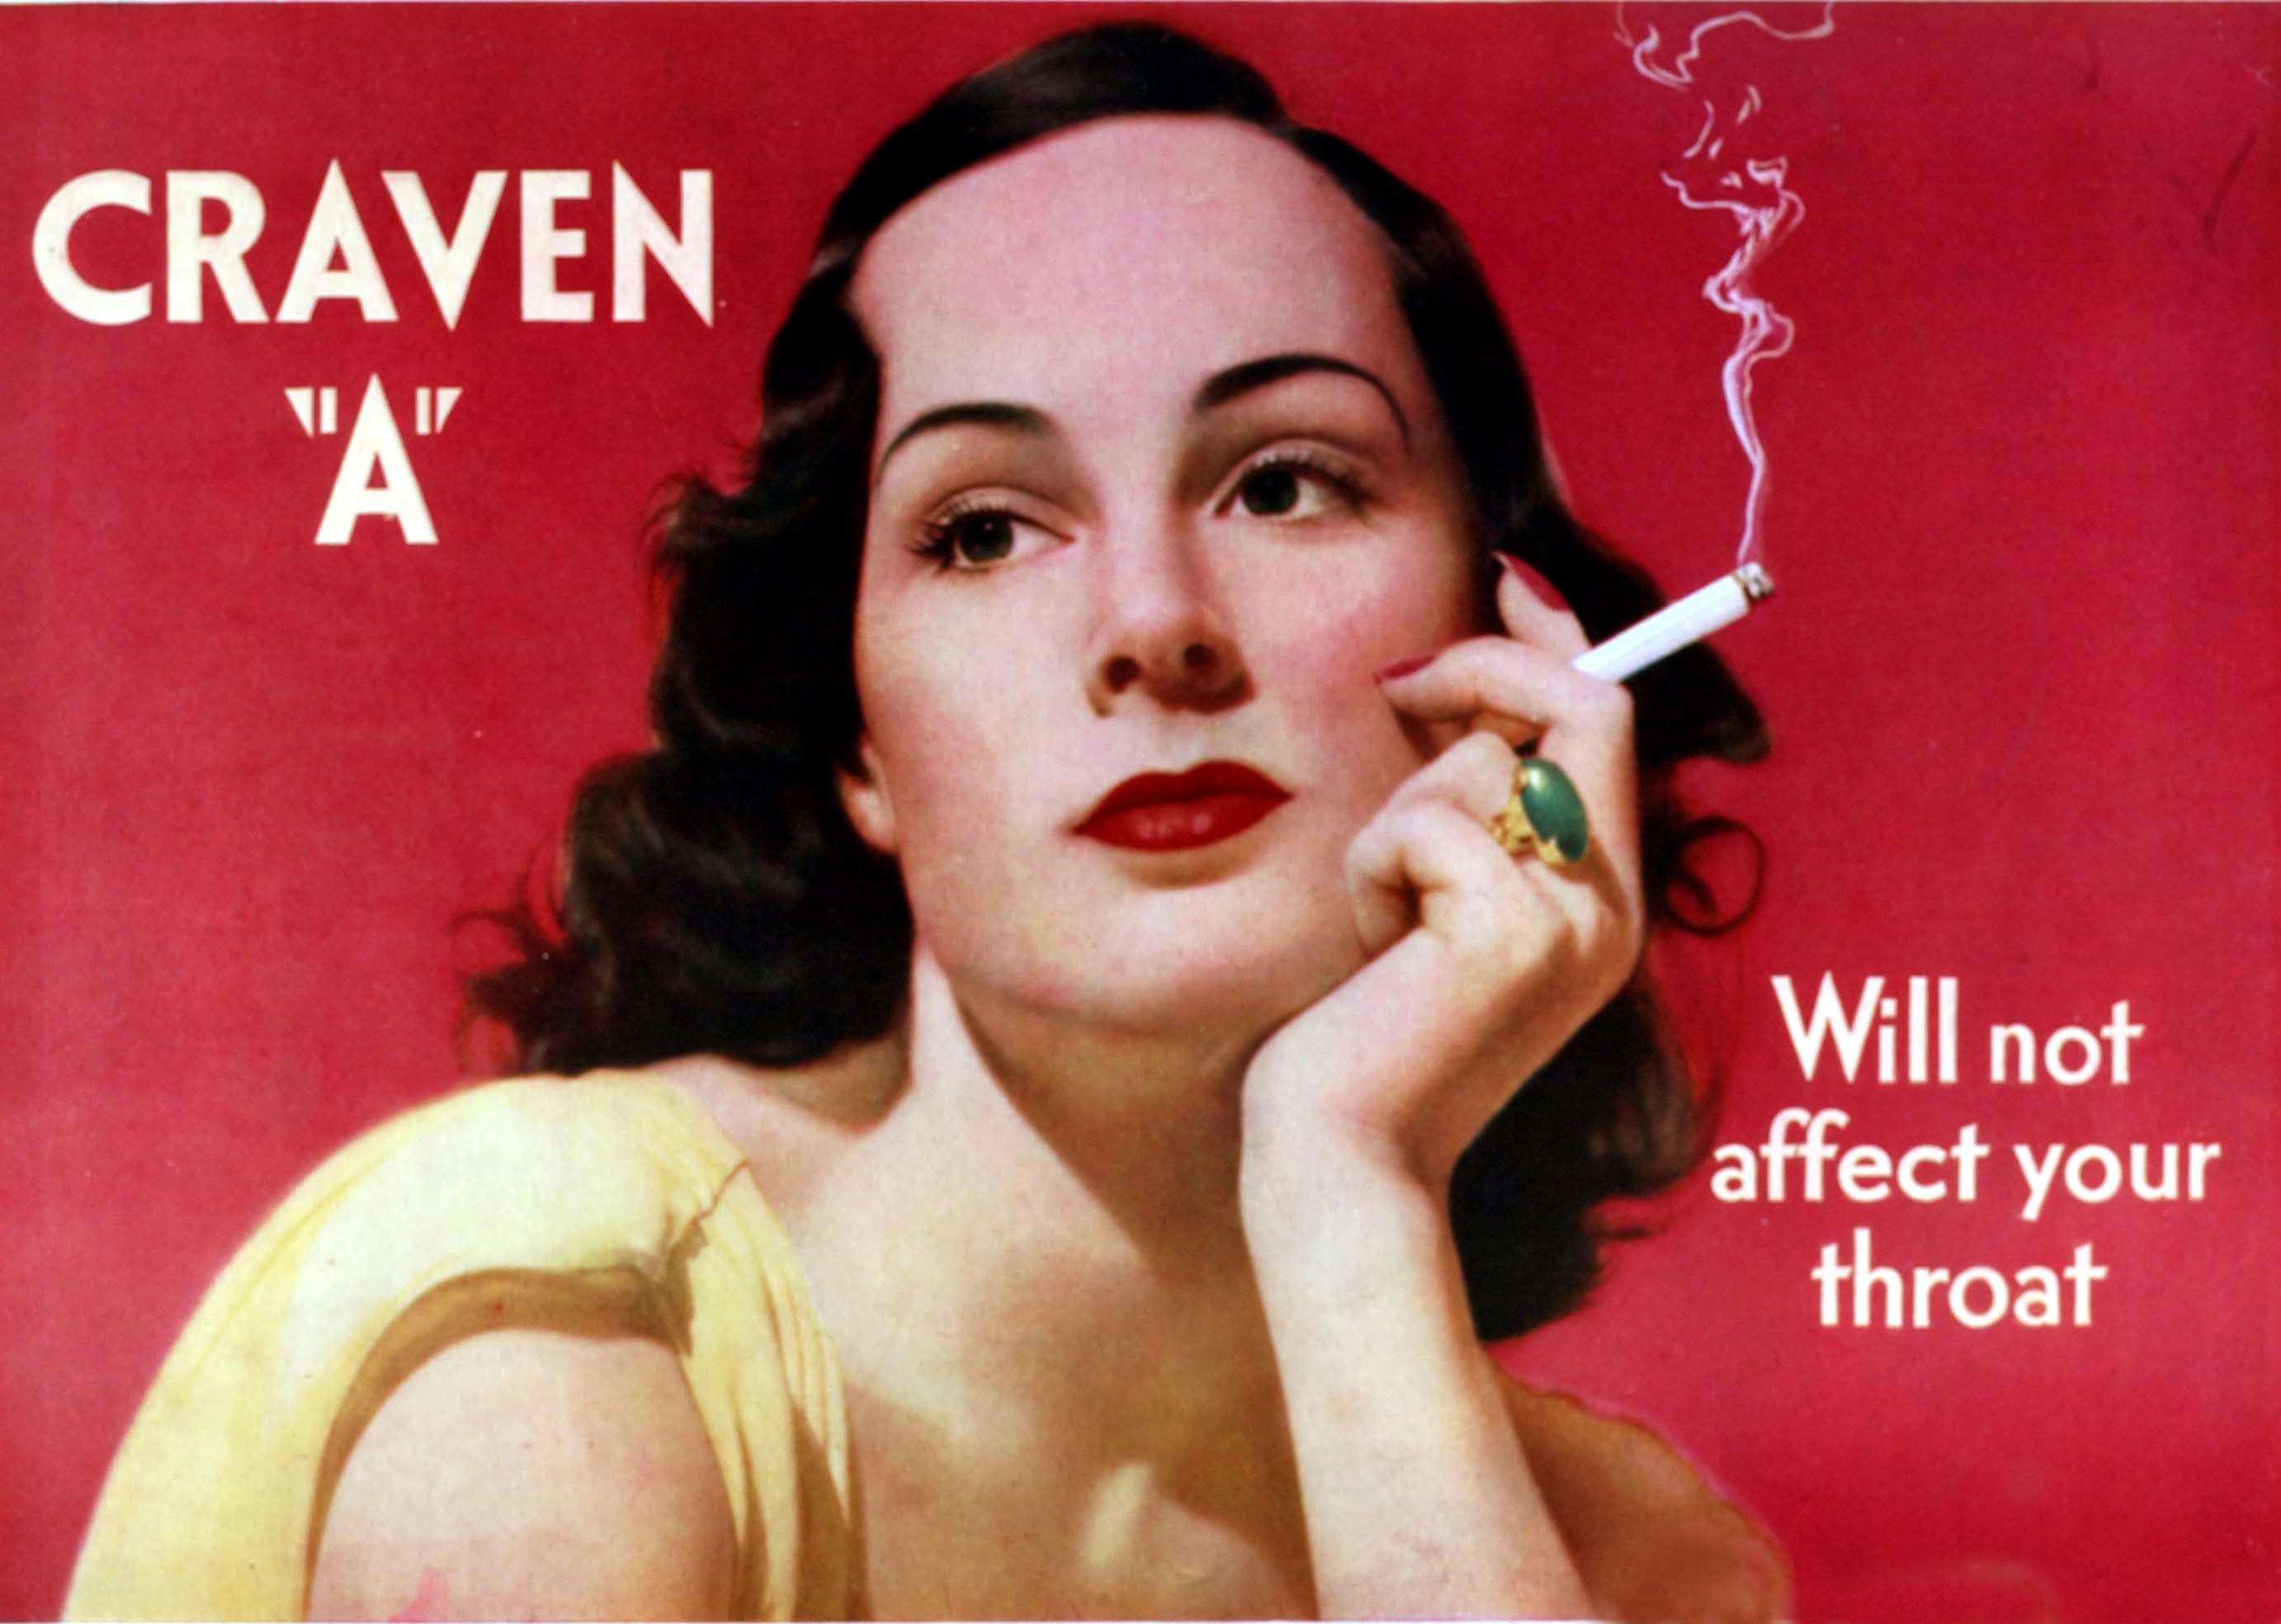 Cigarette ads from the 20th century